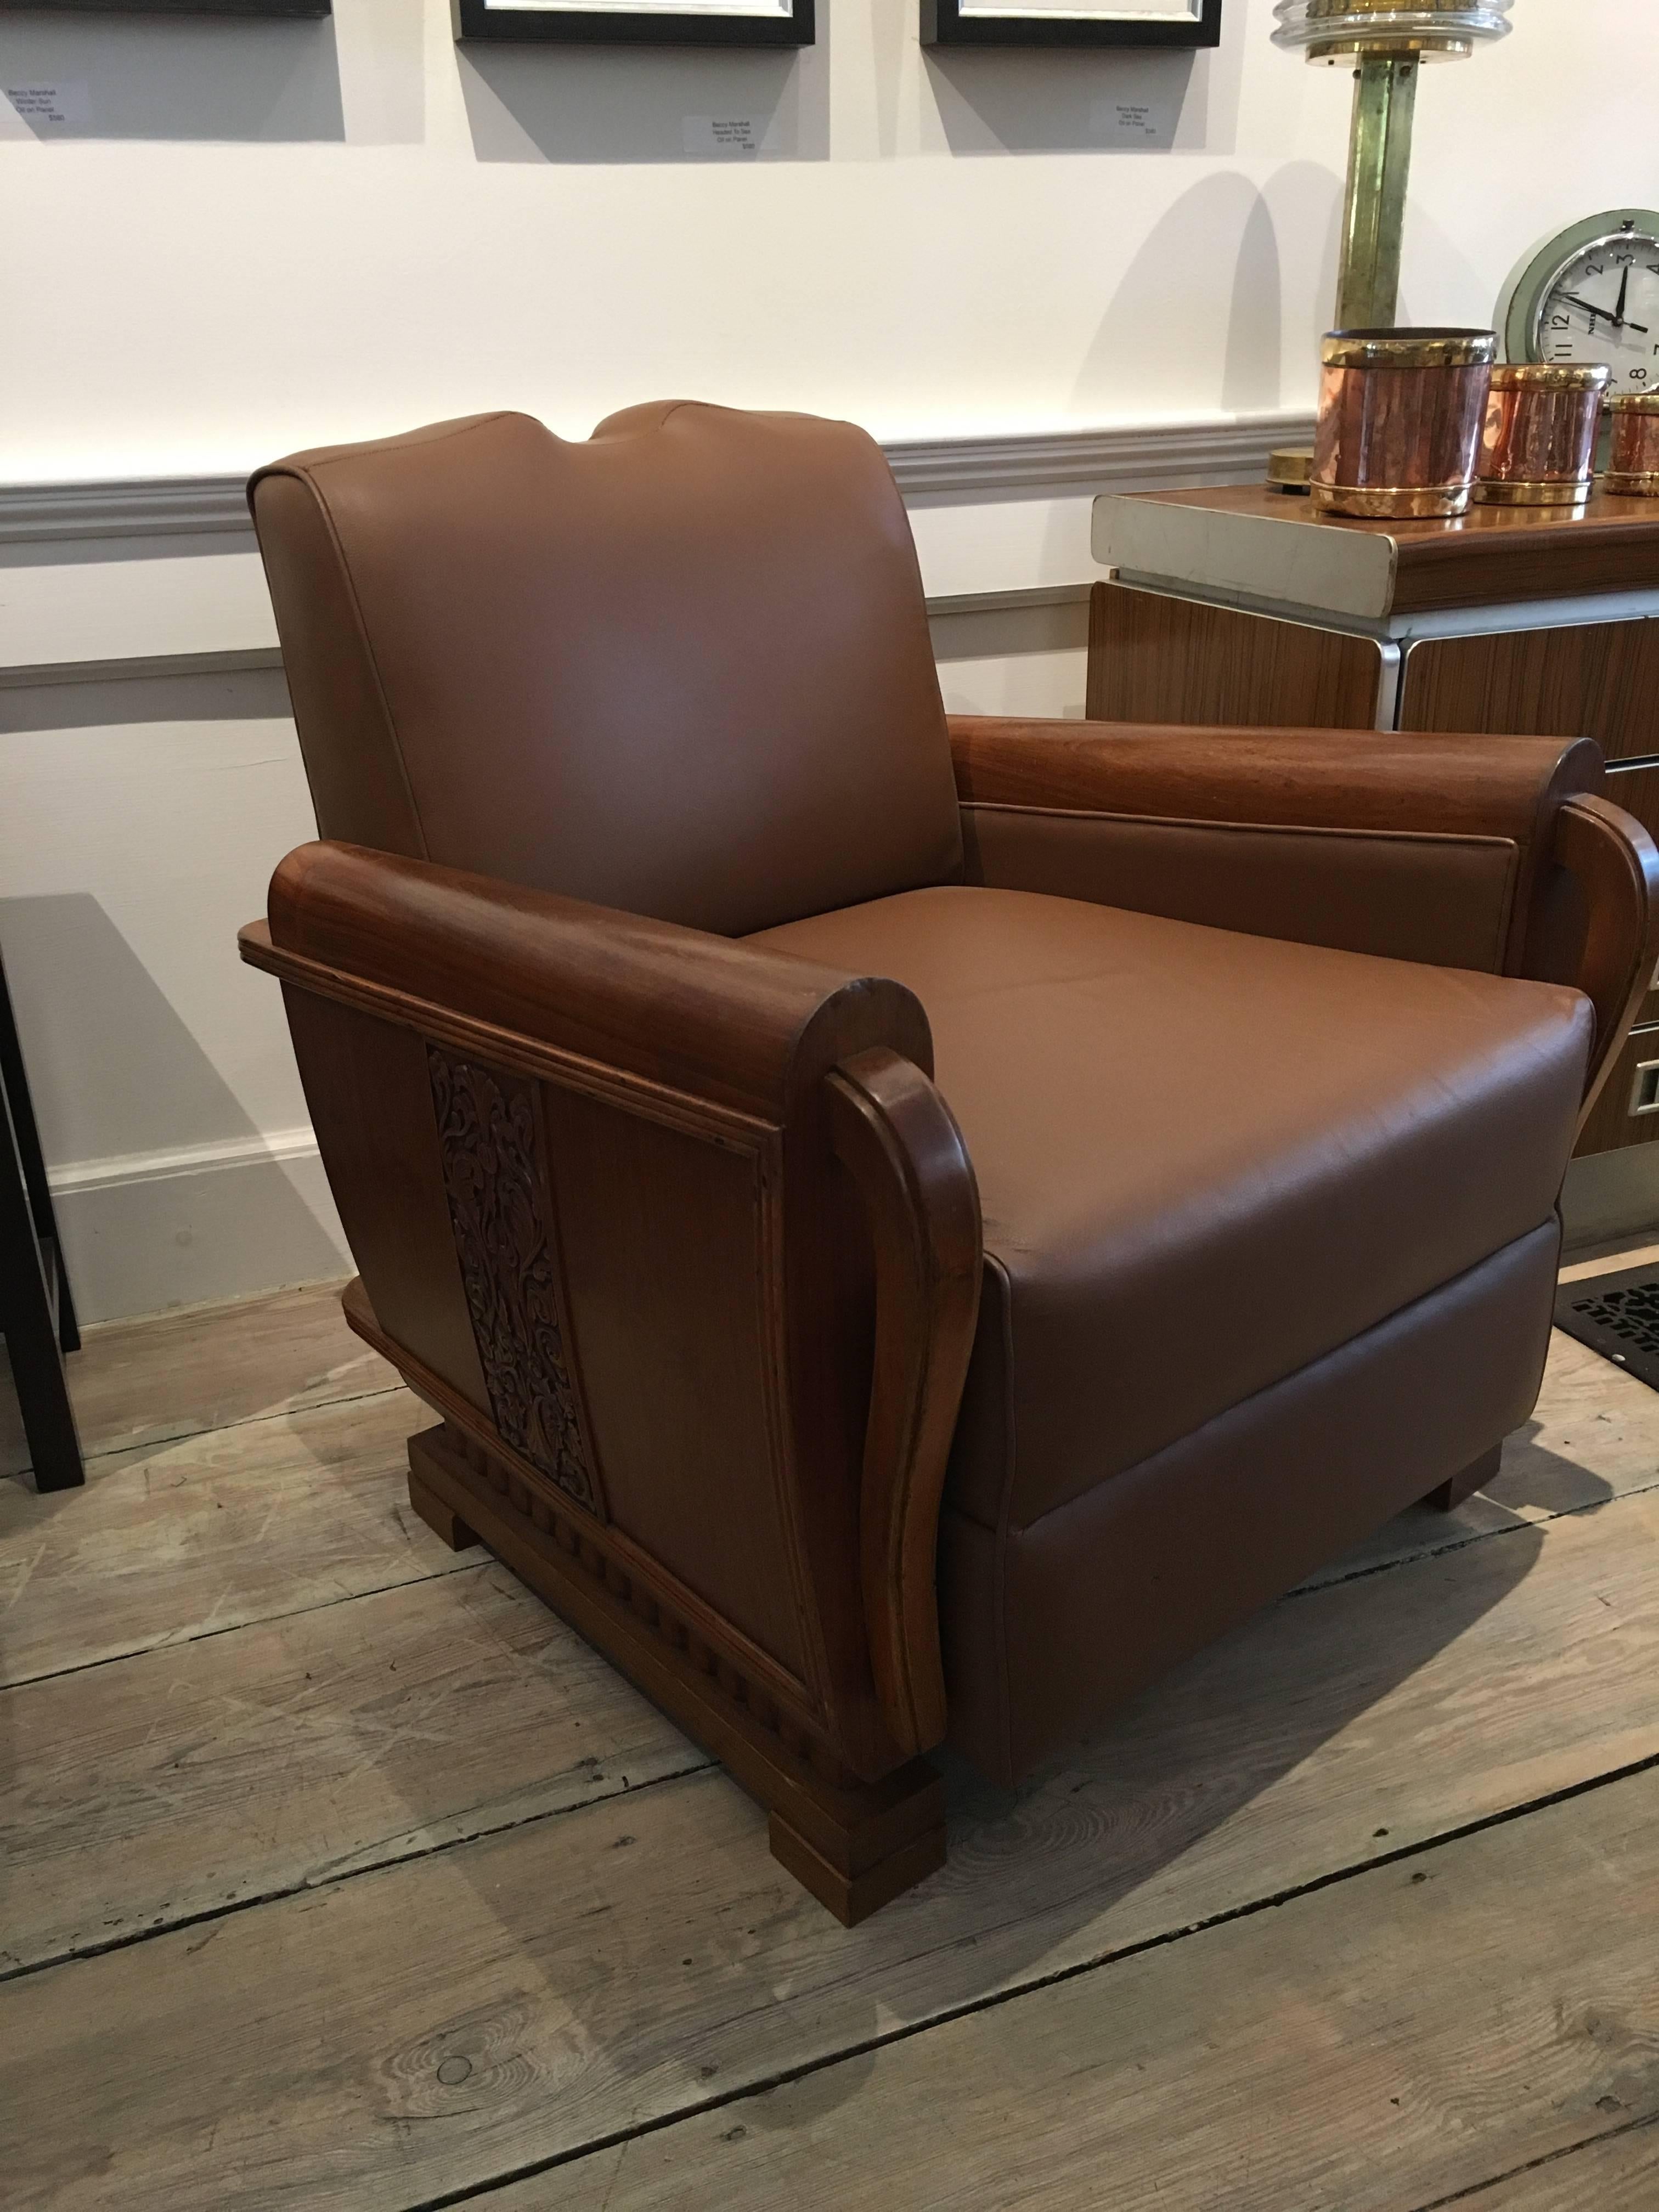 Pair of art deco period teak and leather club or lounge chairs with beautifully carved detail along the sides with a mustache back. These are substantial and incredibly well made. The leather upholstery is not original but in good condition having